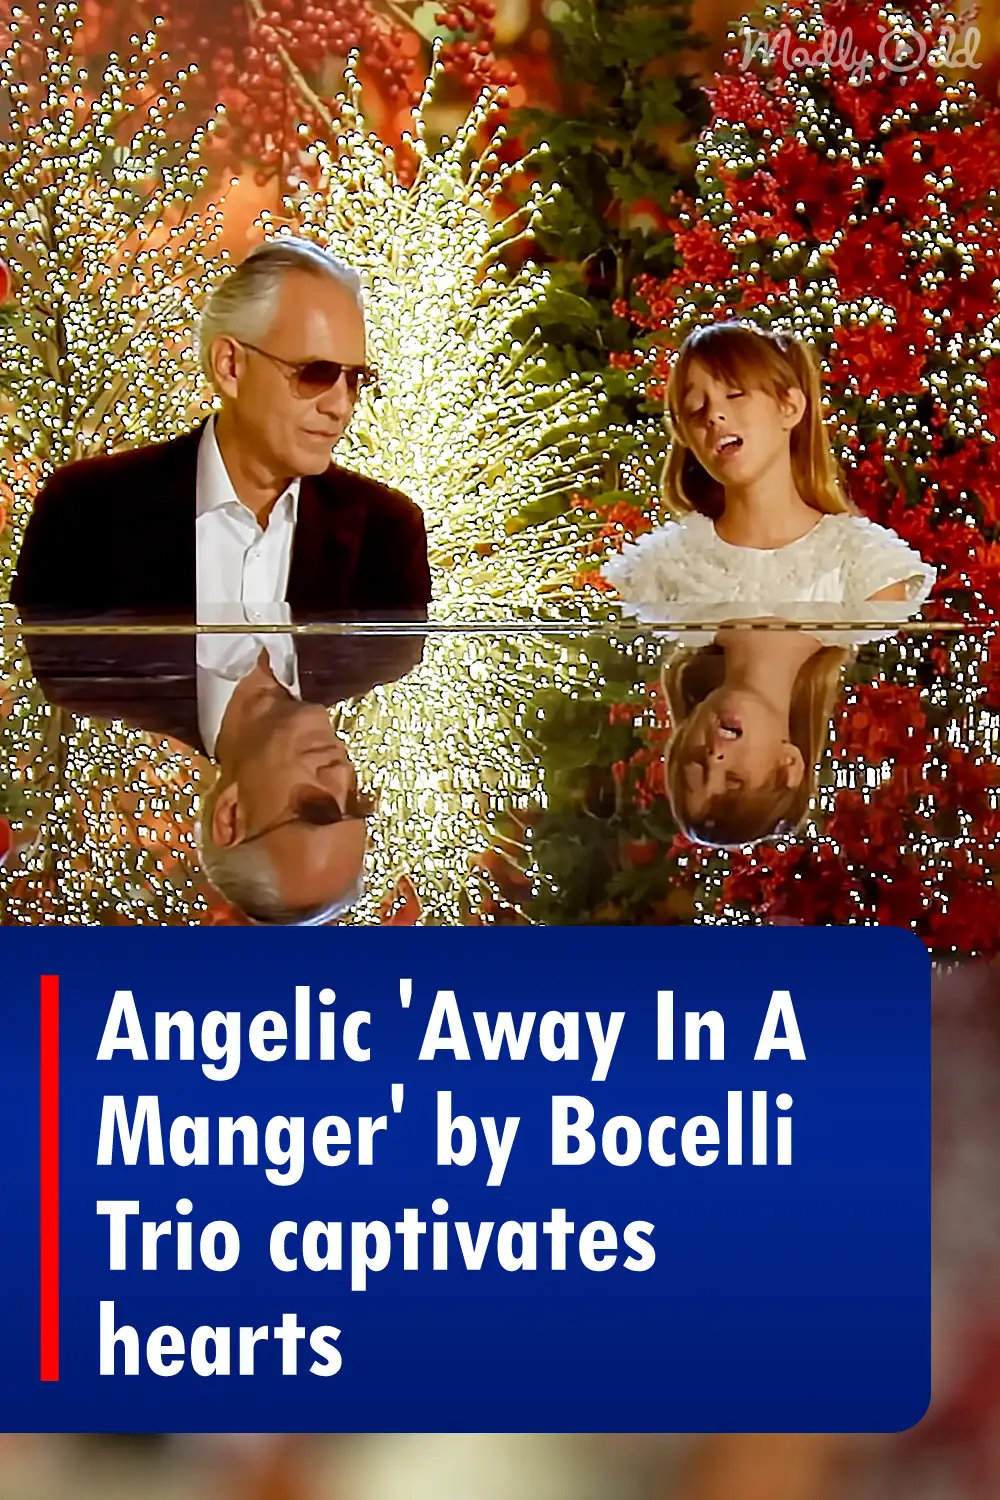 Angelic \'Away In A Manger\' by Bocelli Trio captivates hearts